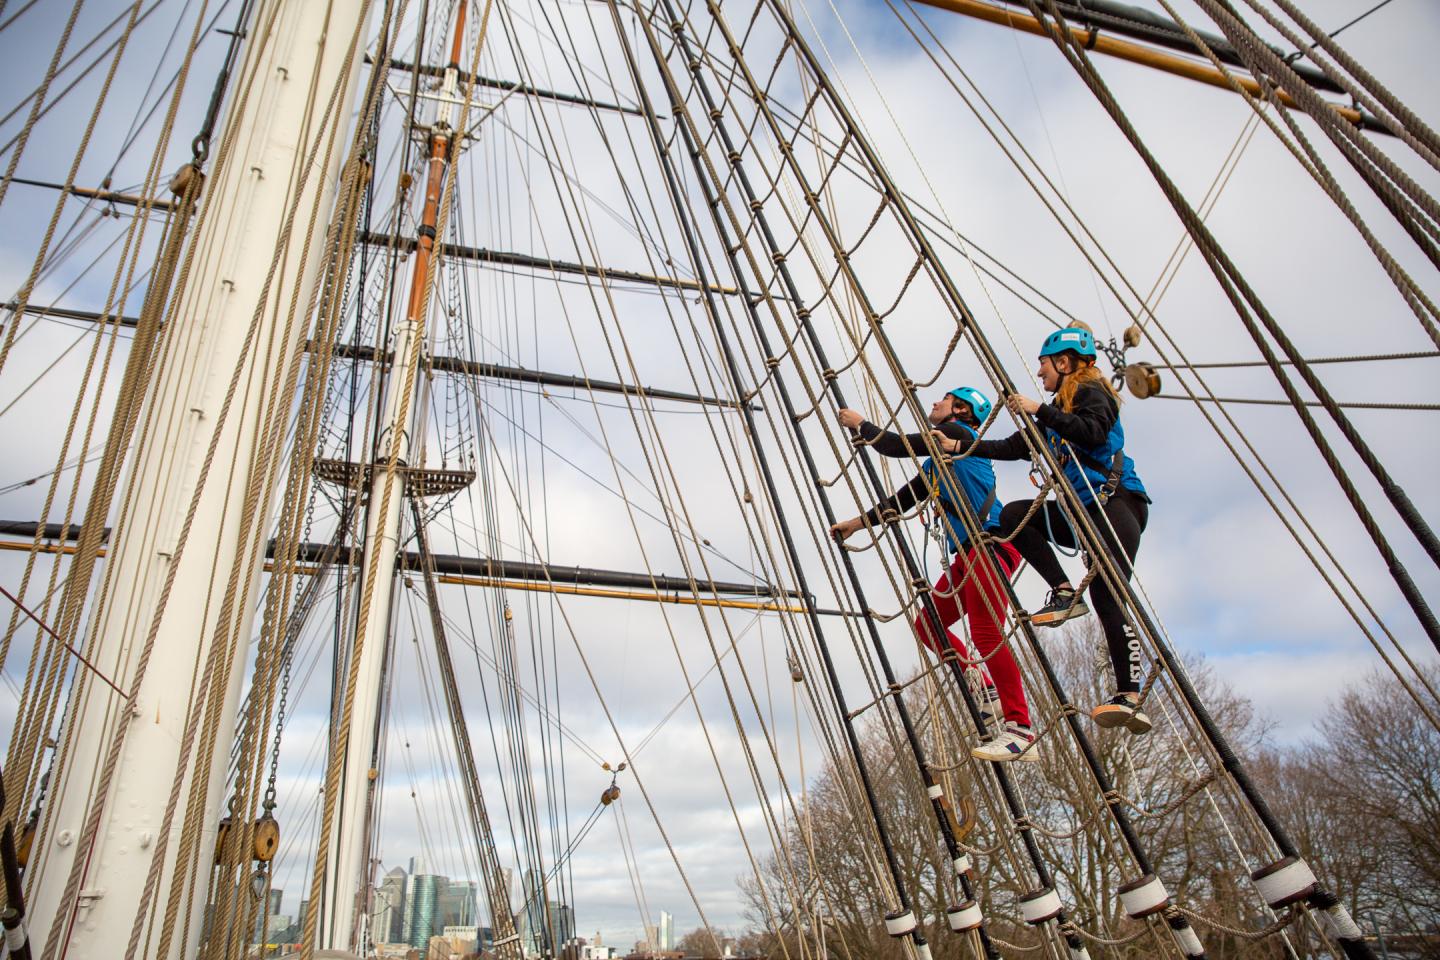 The image shows two people ascending the rigging of the Cutty Sark.